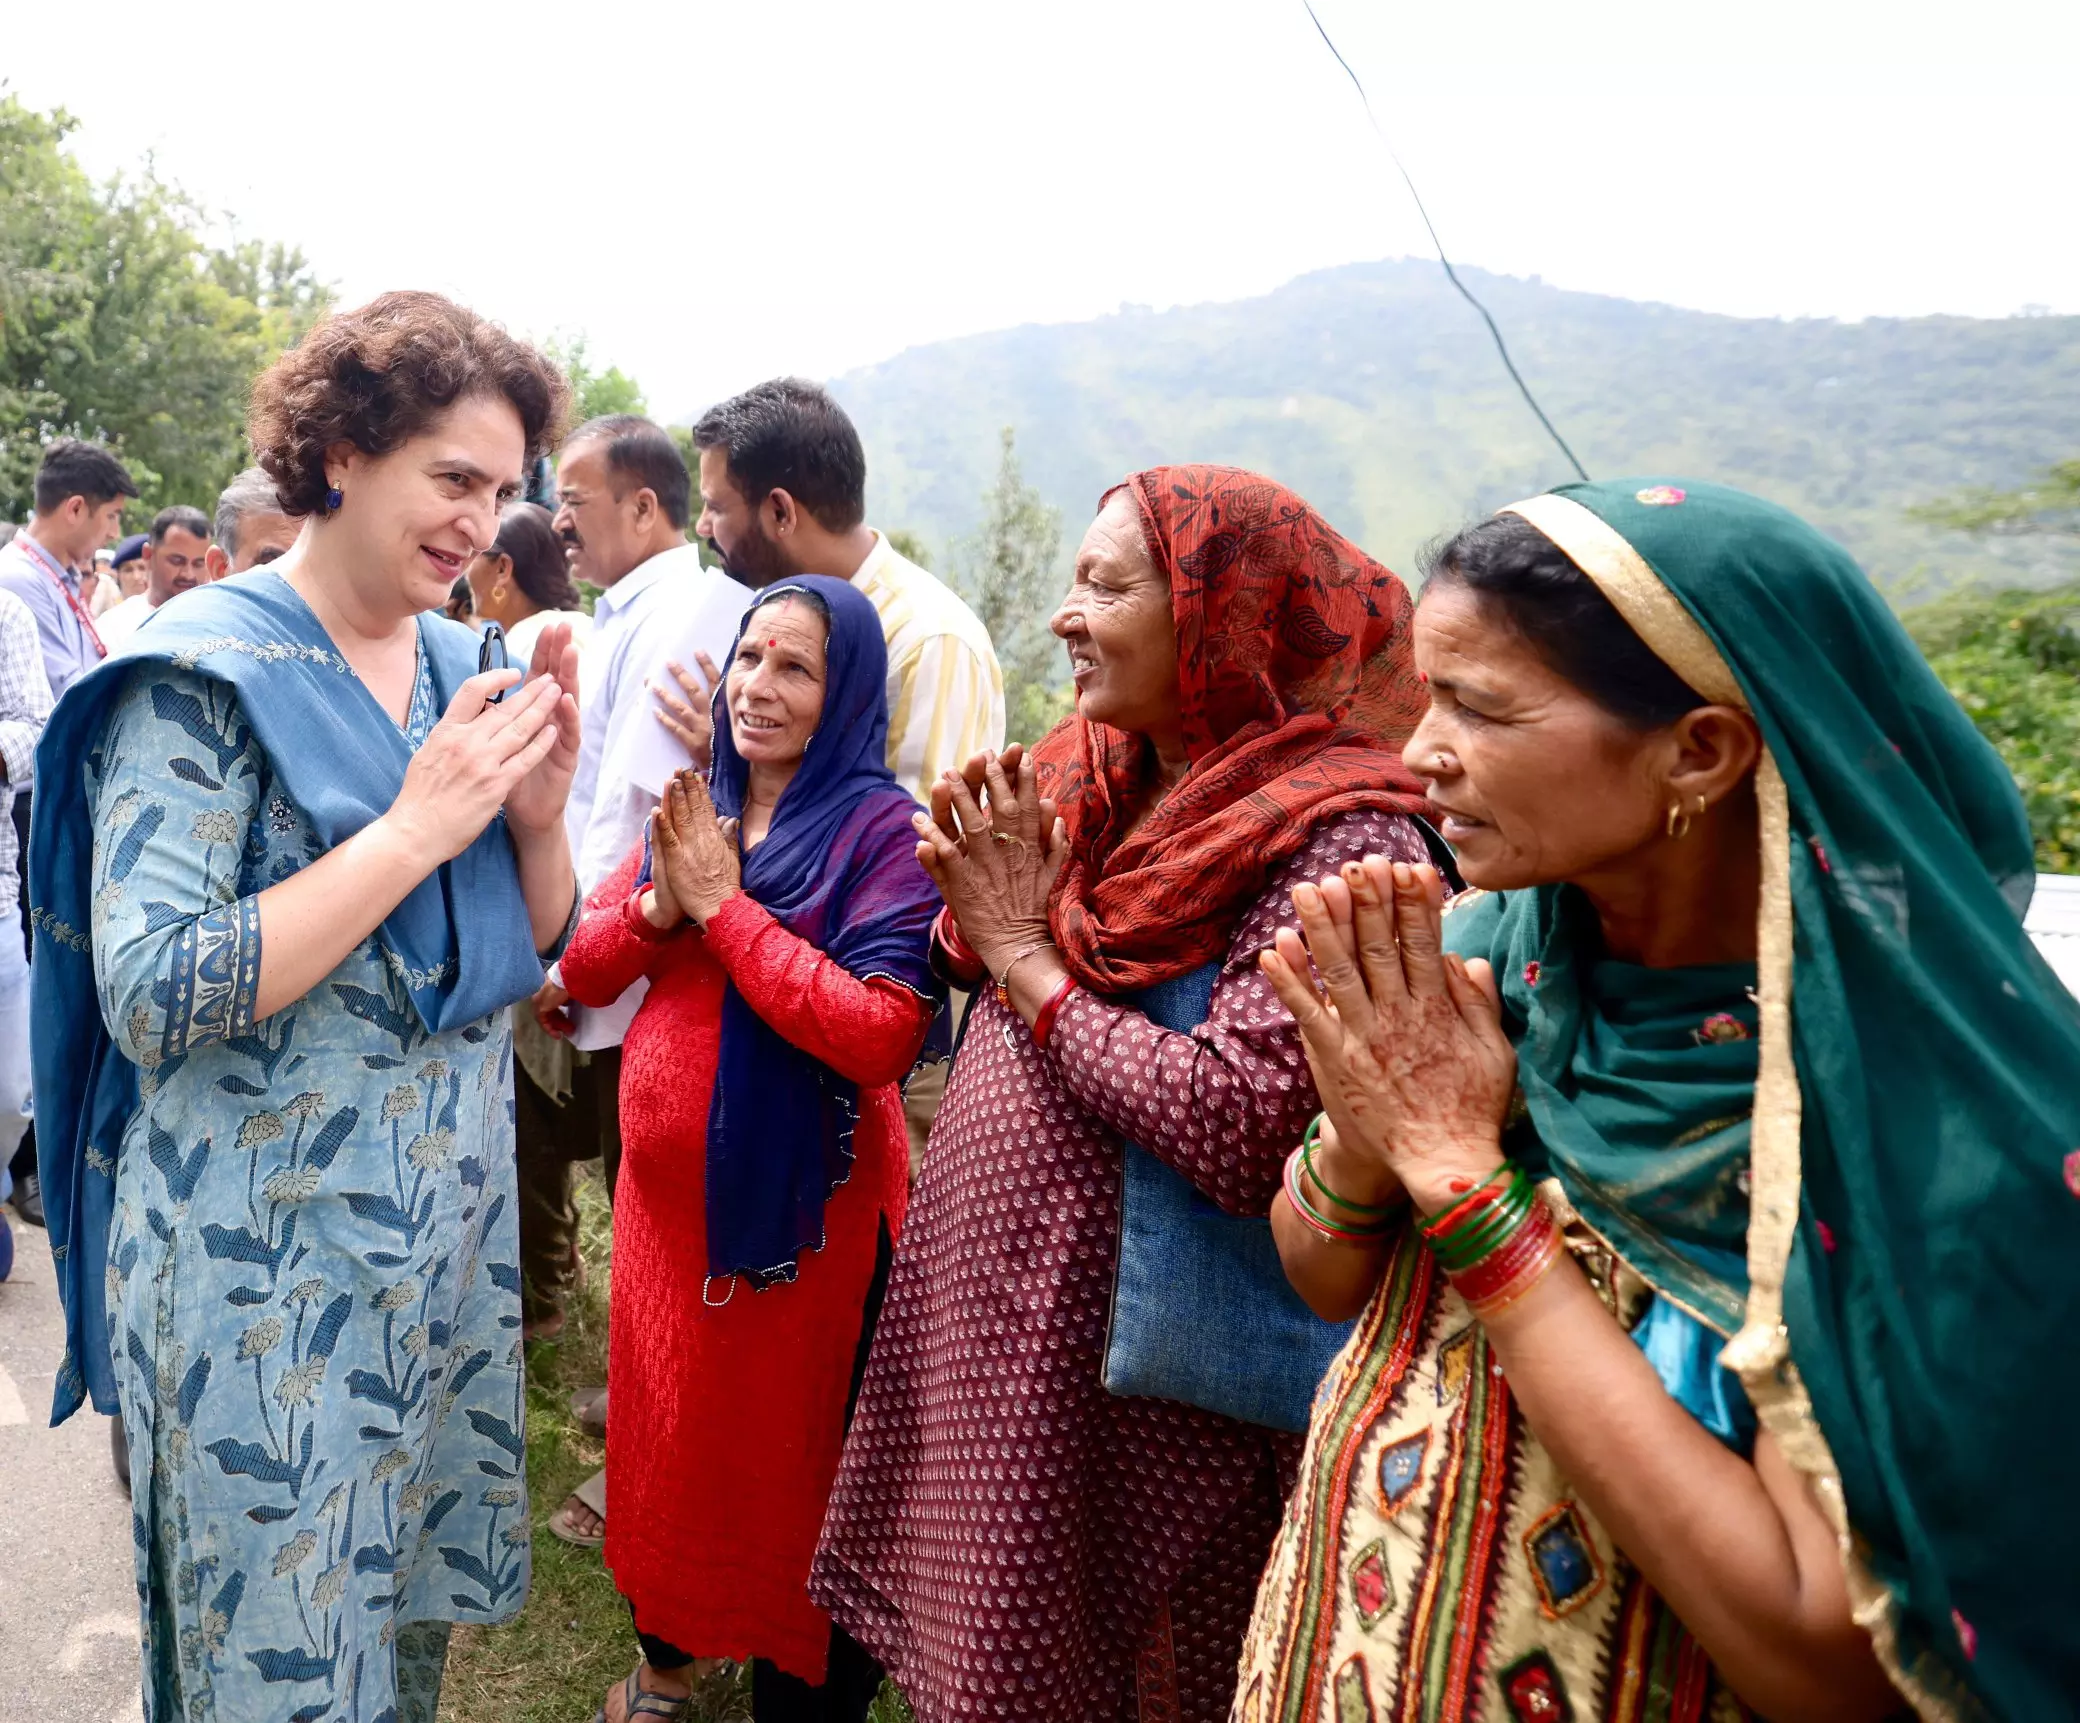 Demand to declare Himachal crisis a national disaster in Parl special session: Priyanka